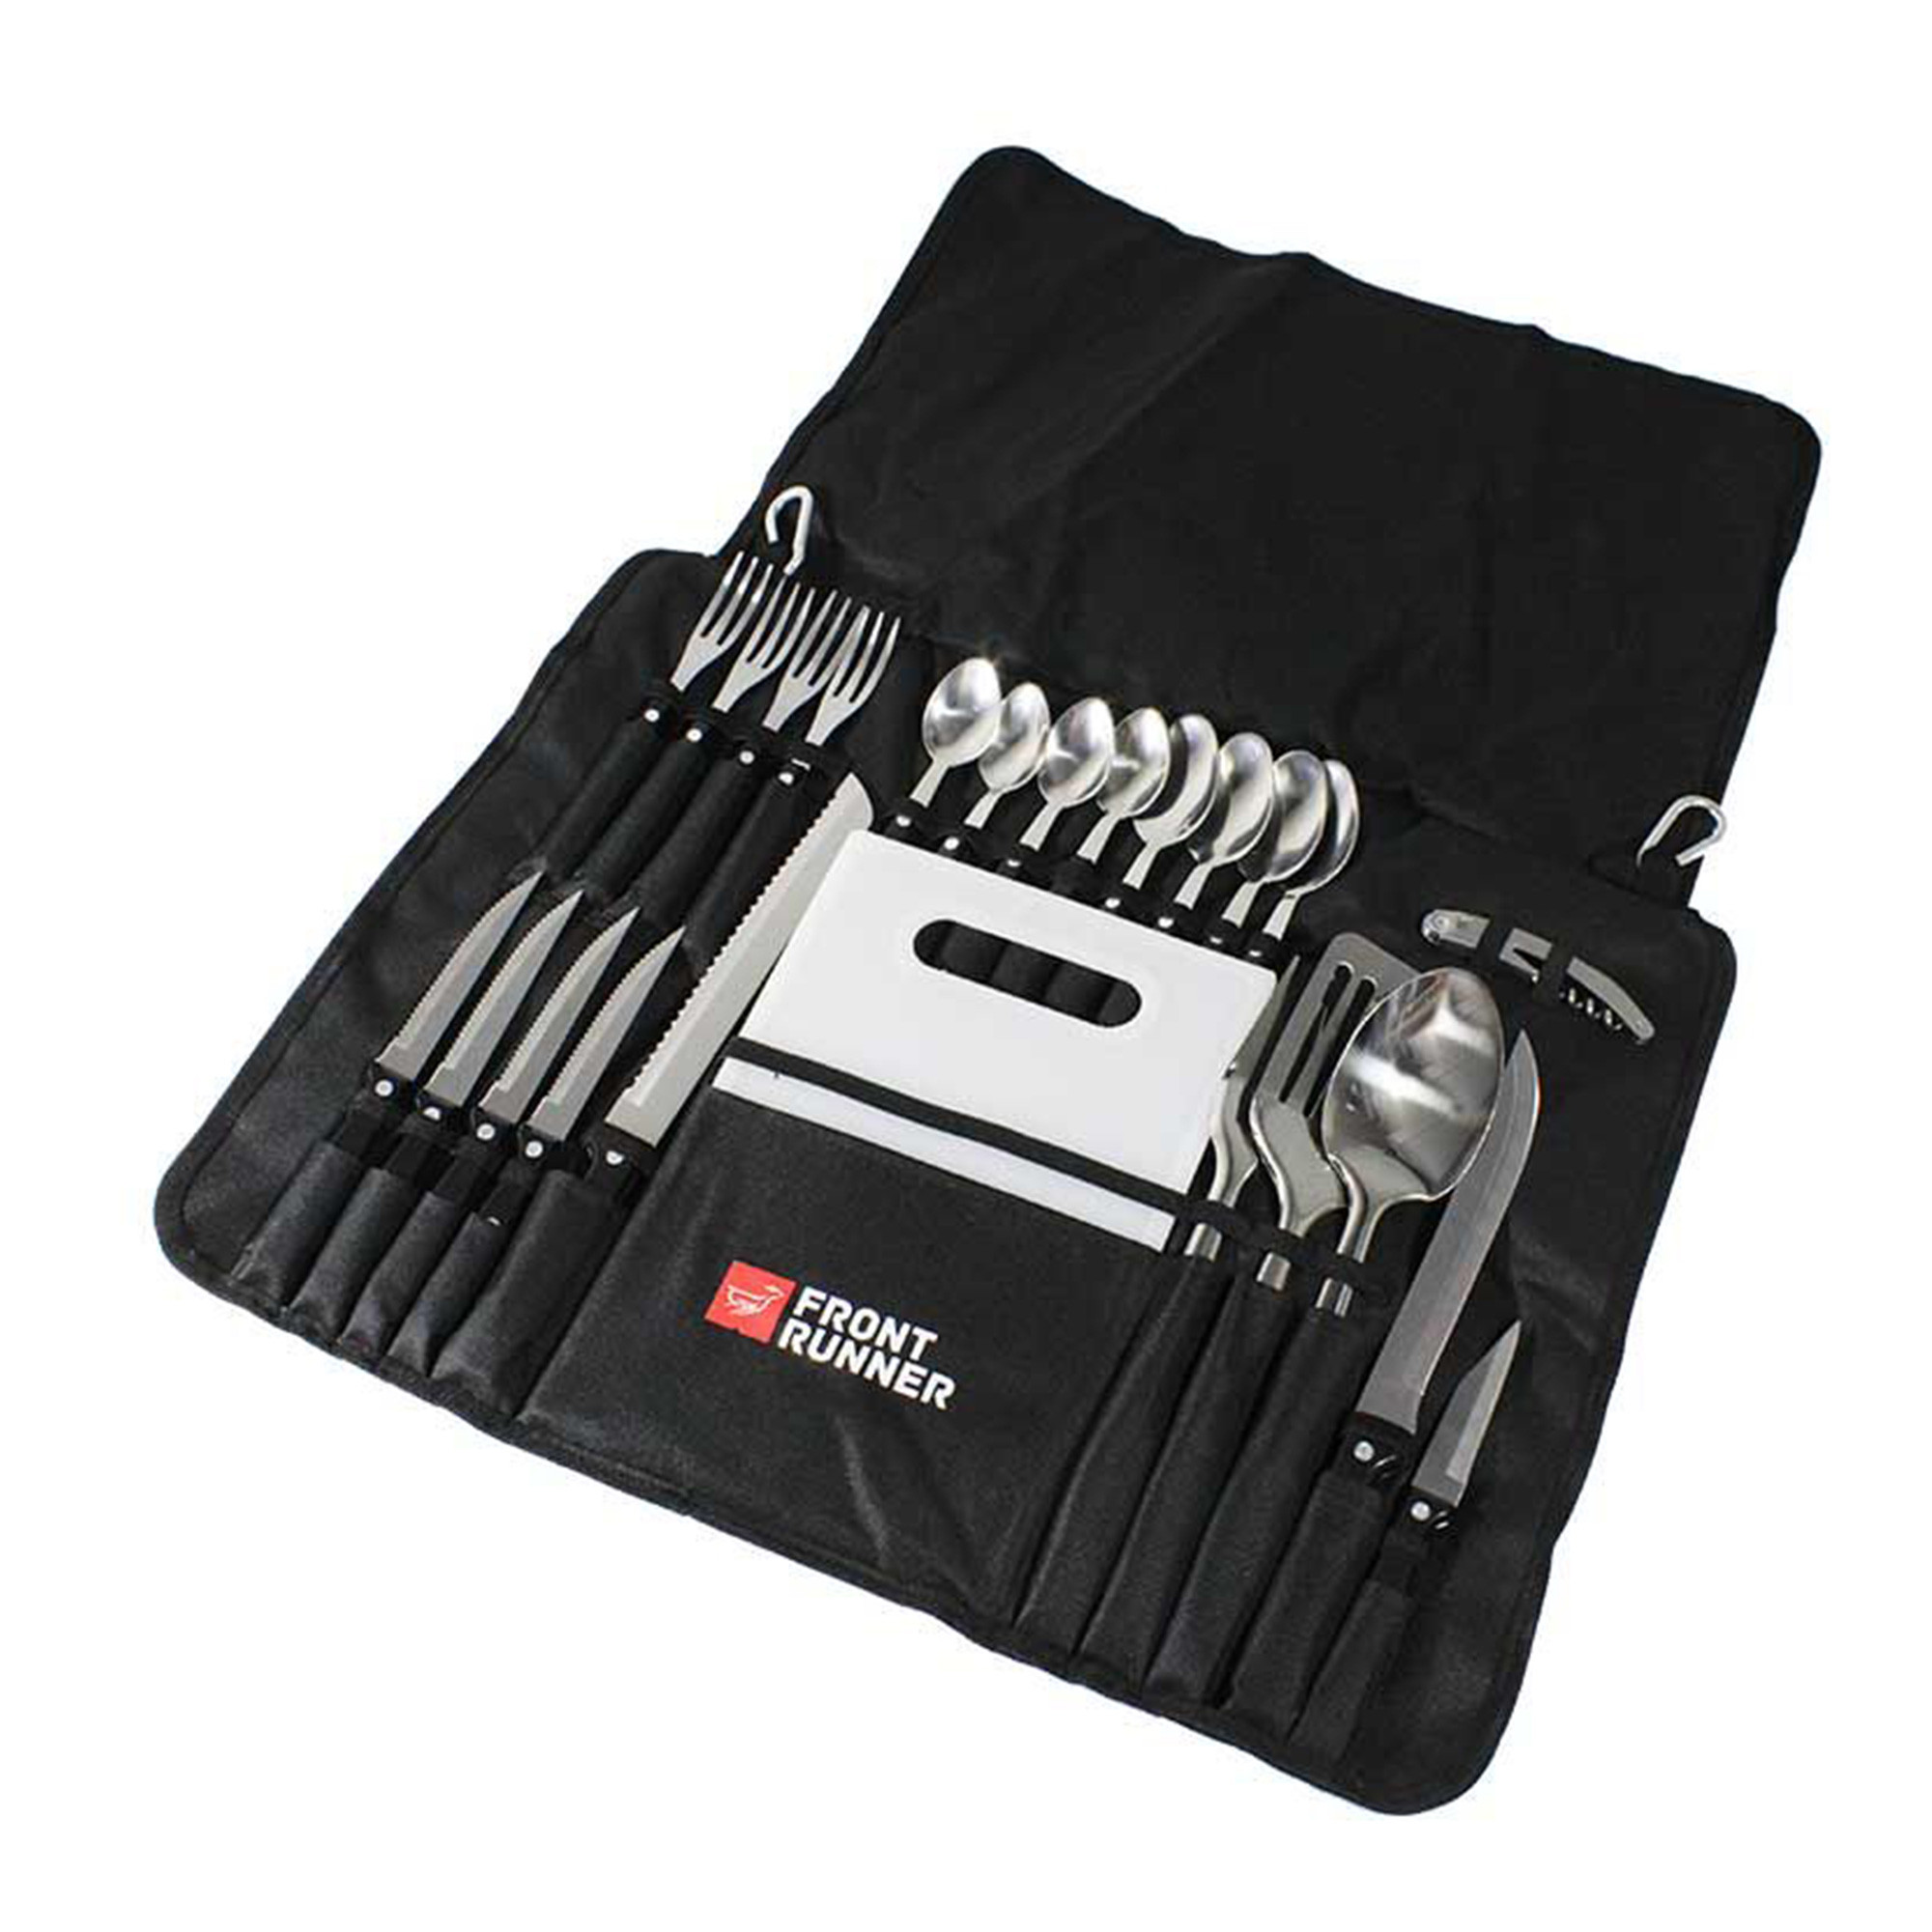 Front Runner Stainless Steel 24 Pc Cutlery Set with Bag